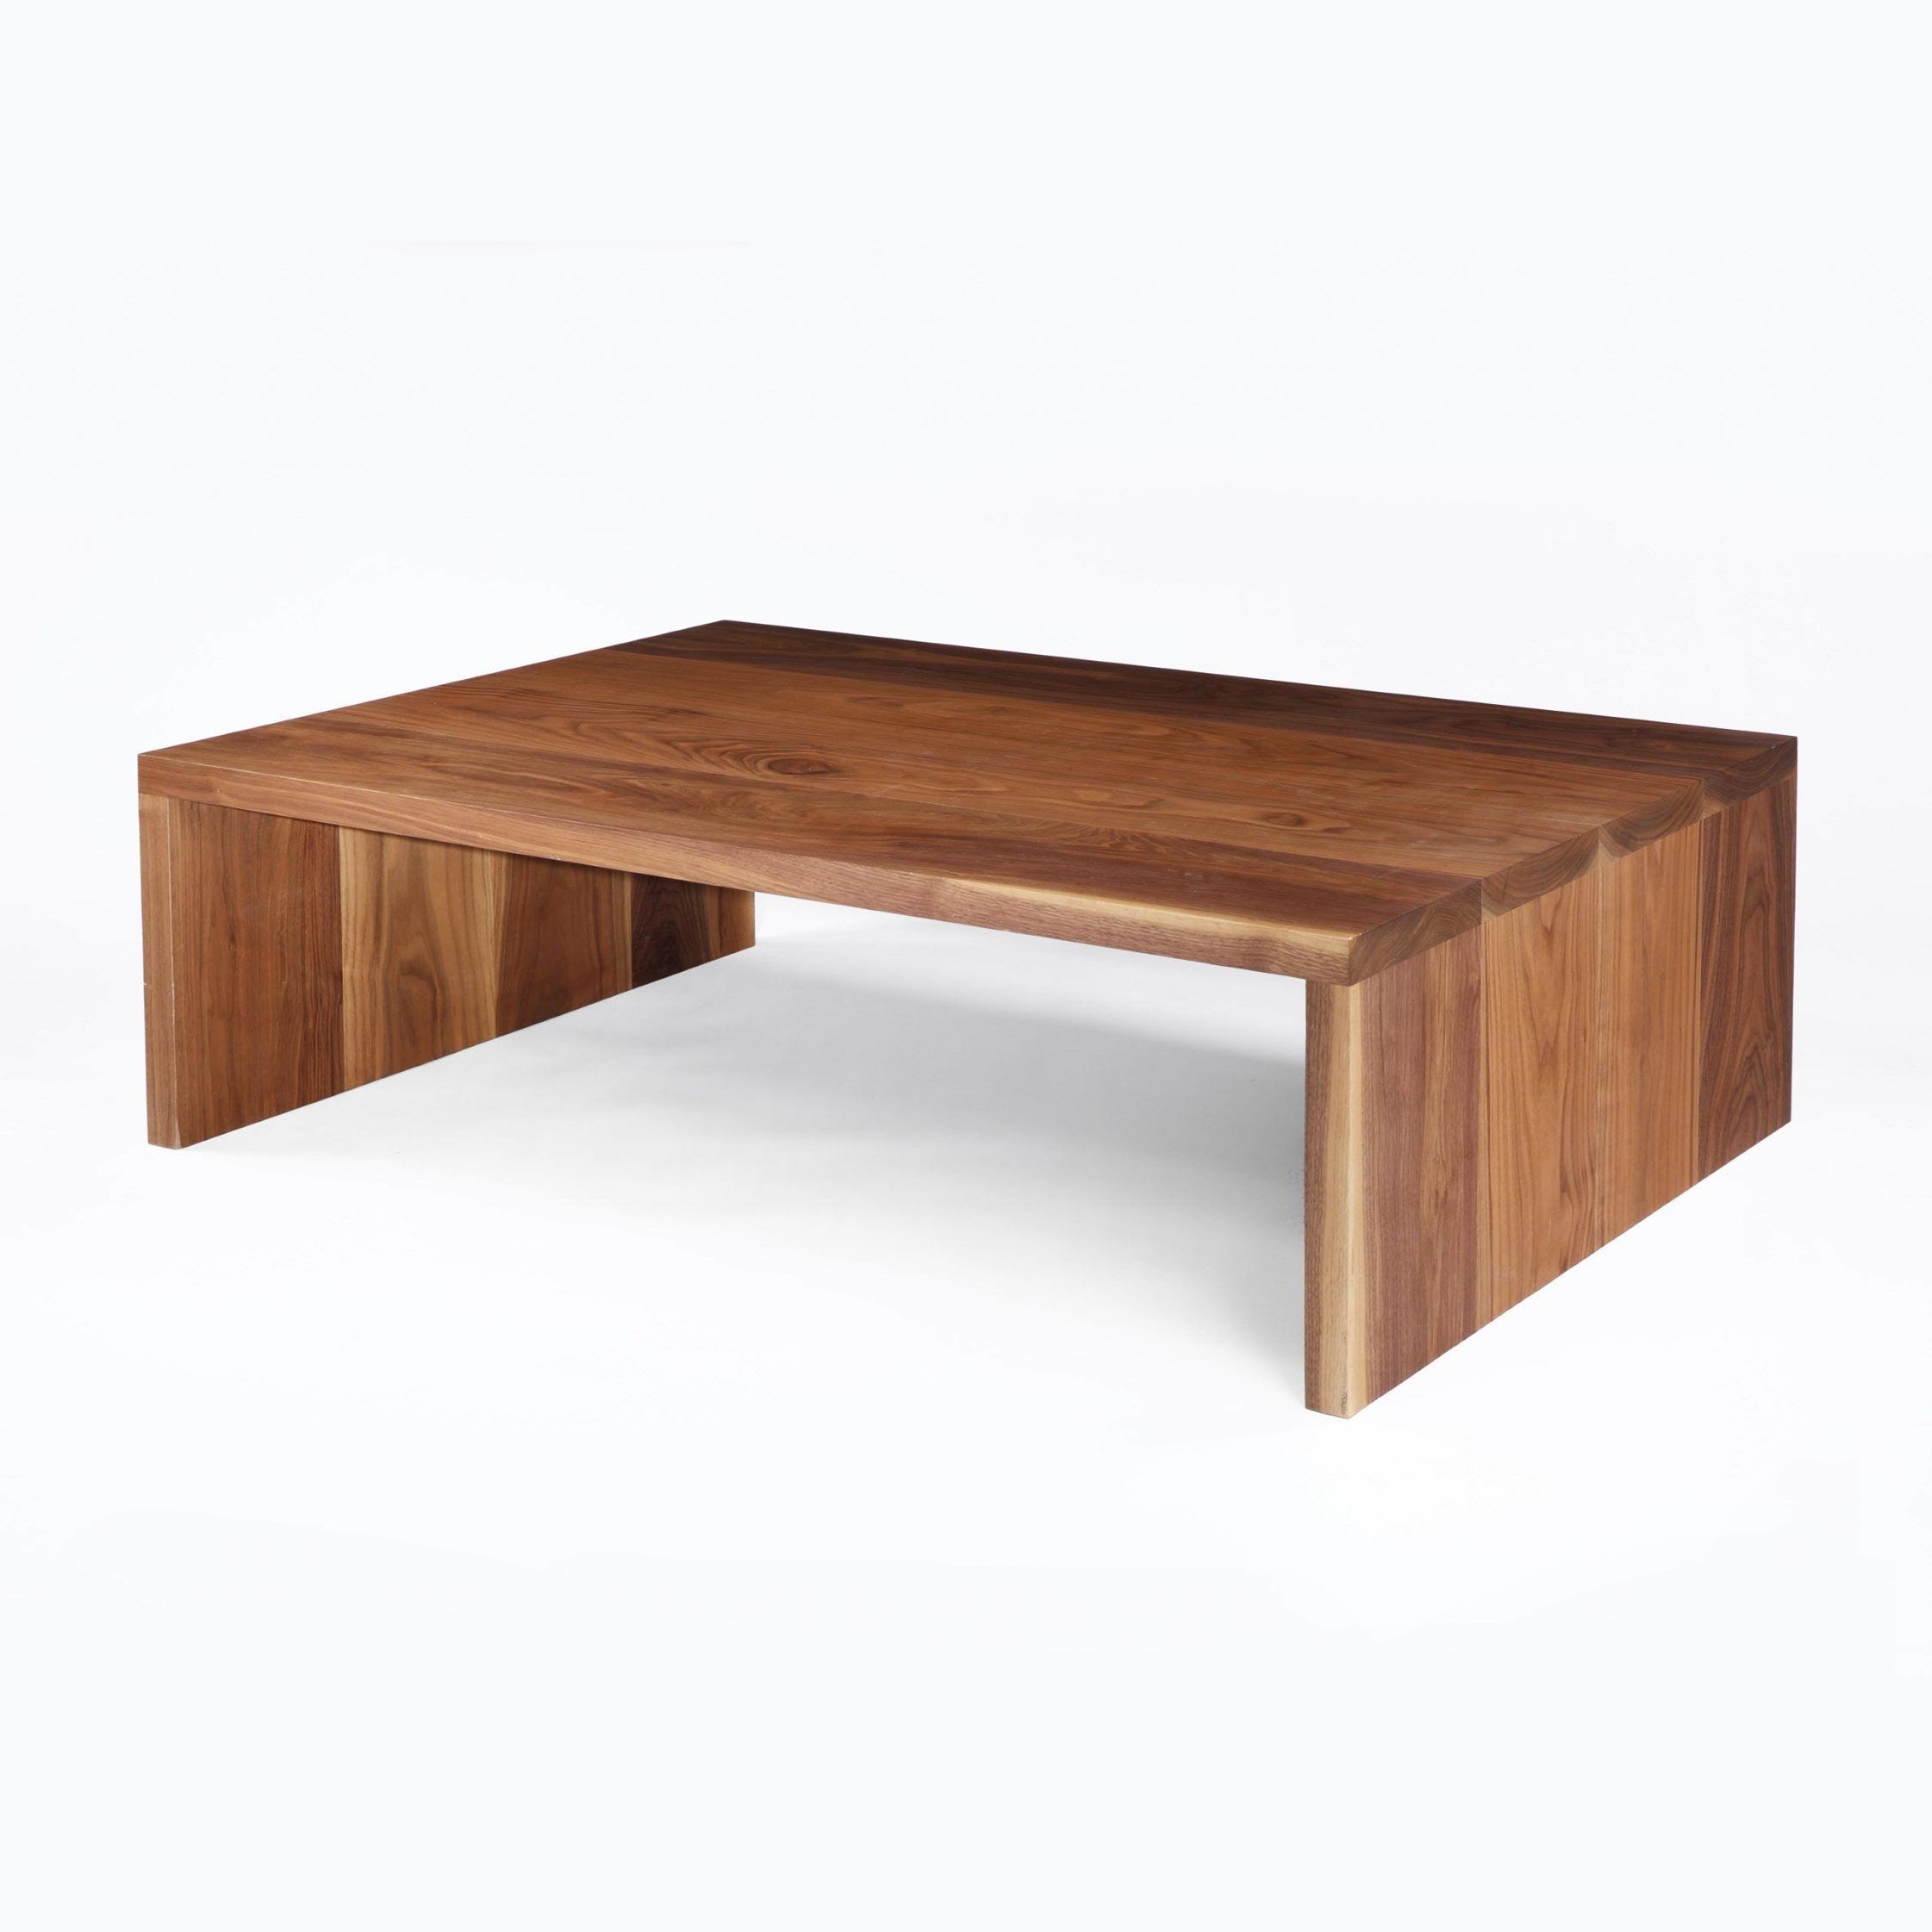 Large Walnut Coffee Table With Walnut Coffee Tables (View 8 of 20)